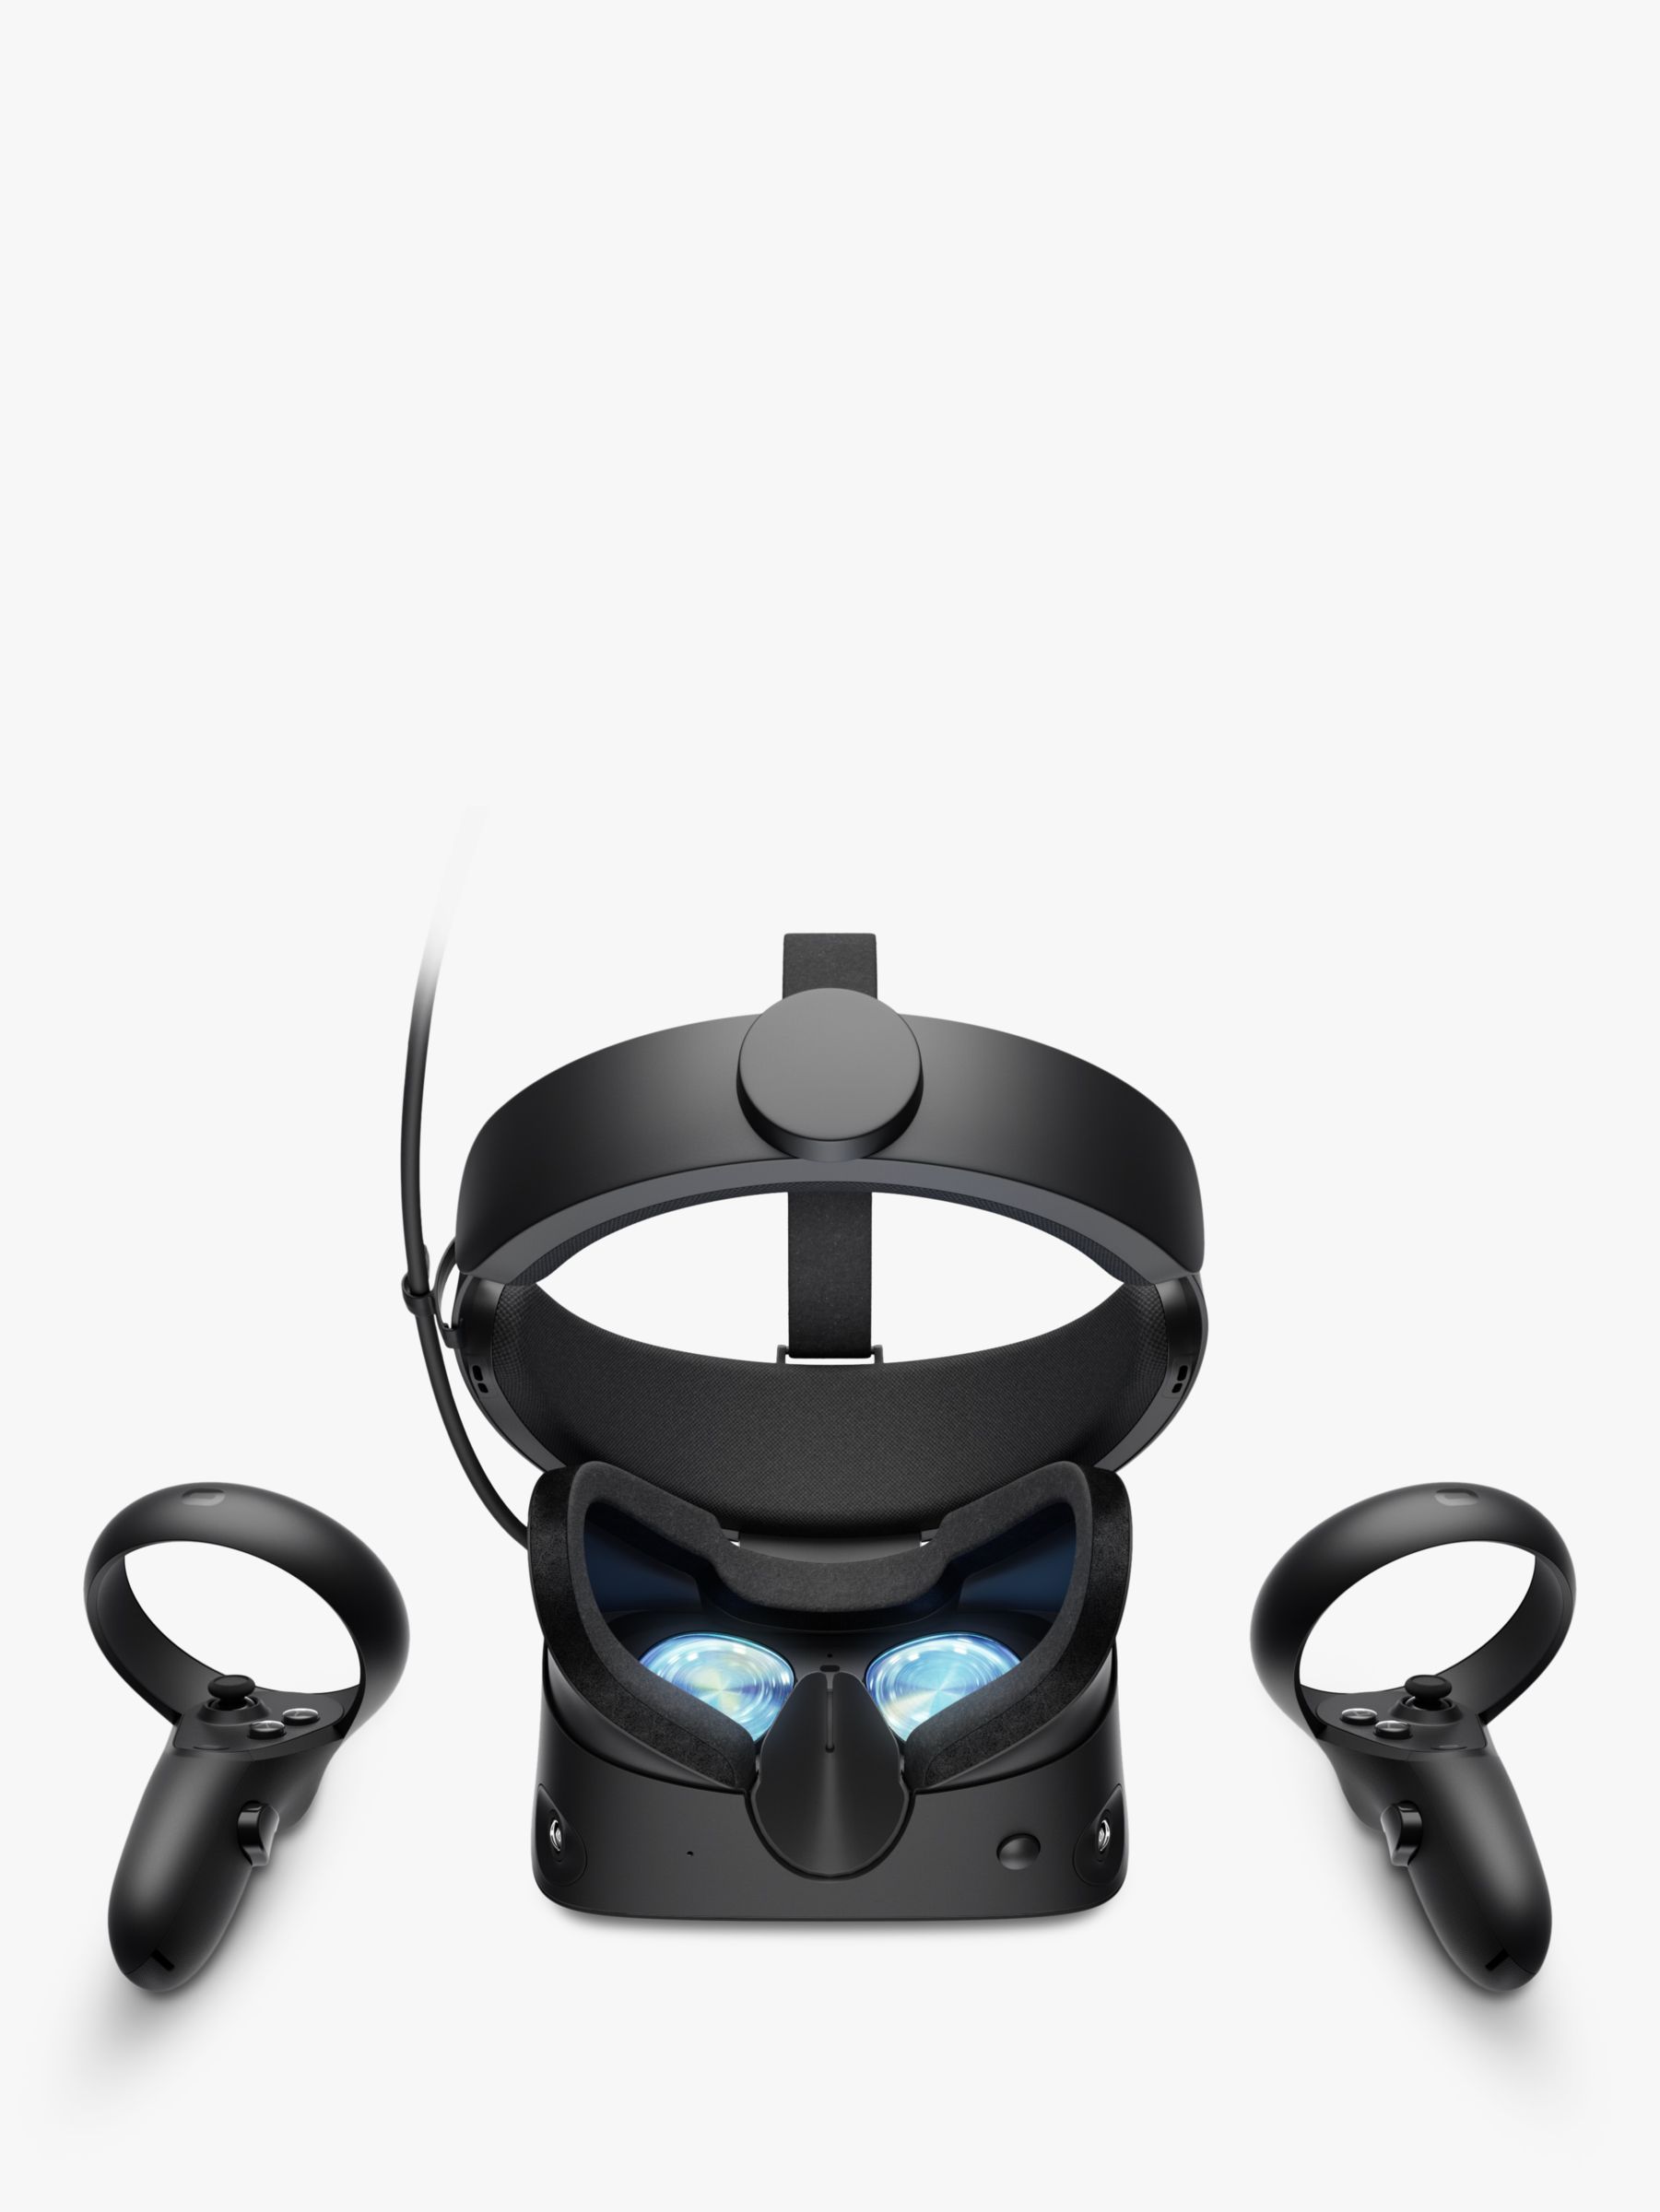 oculus rift s vr headset with touch controllers